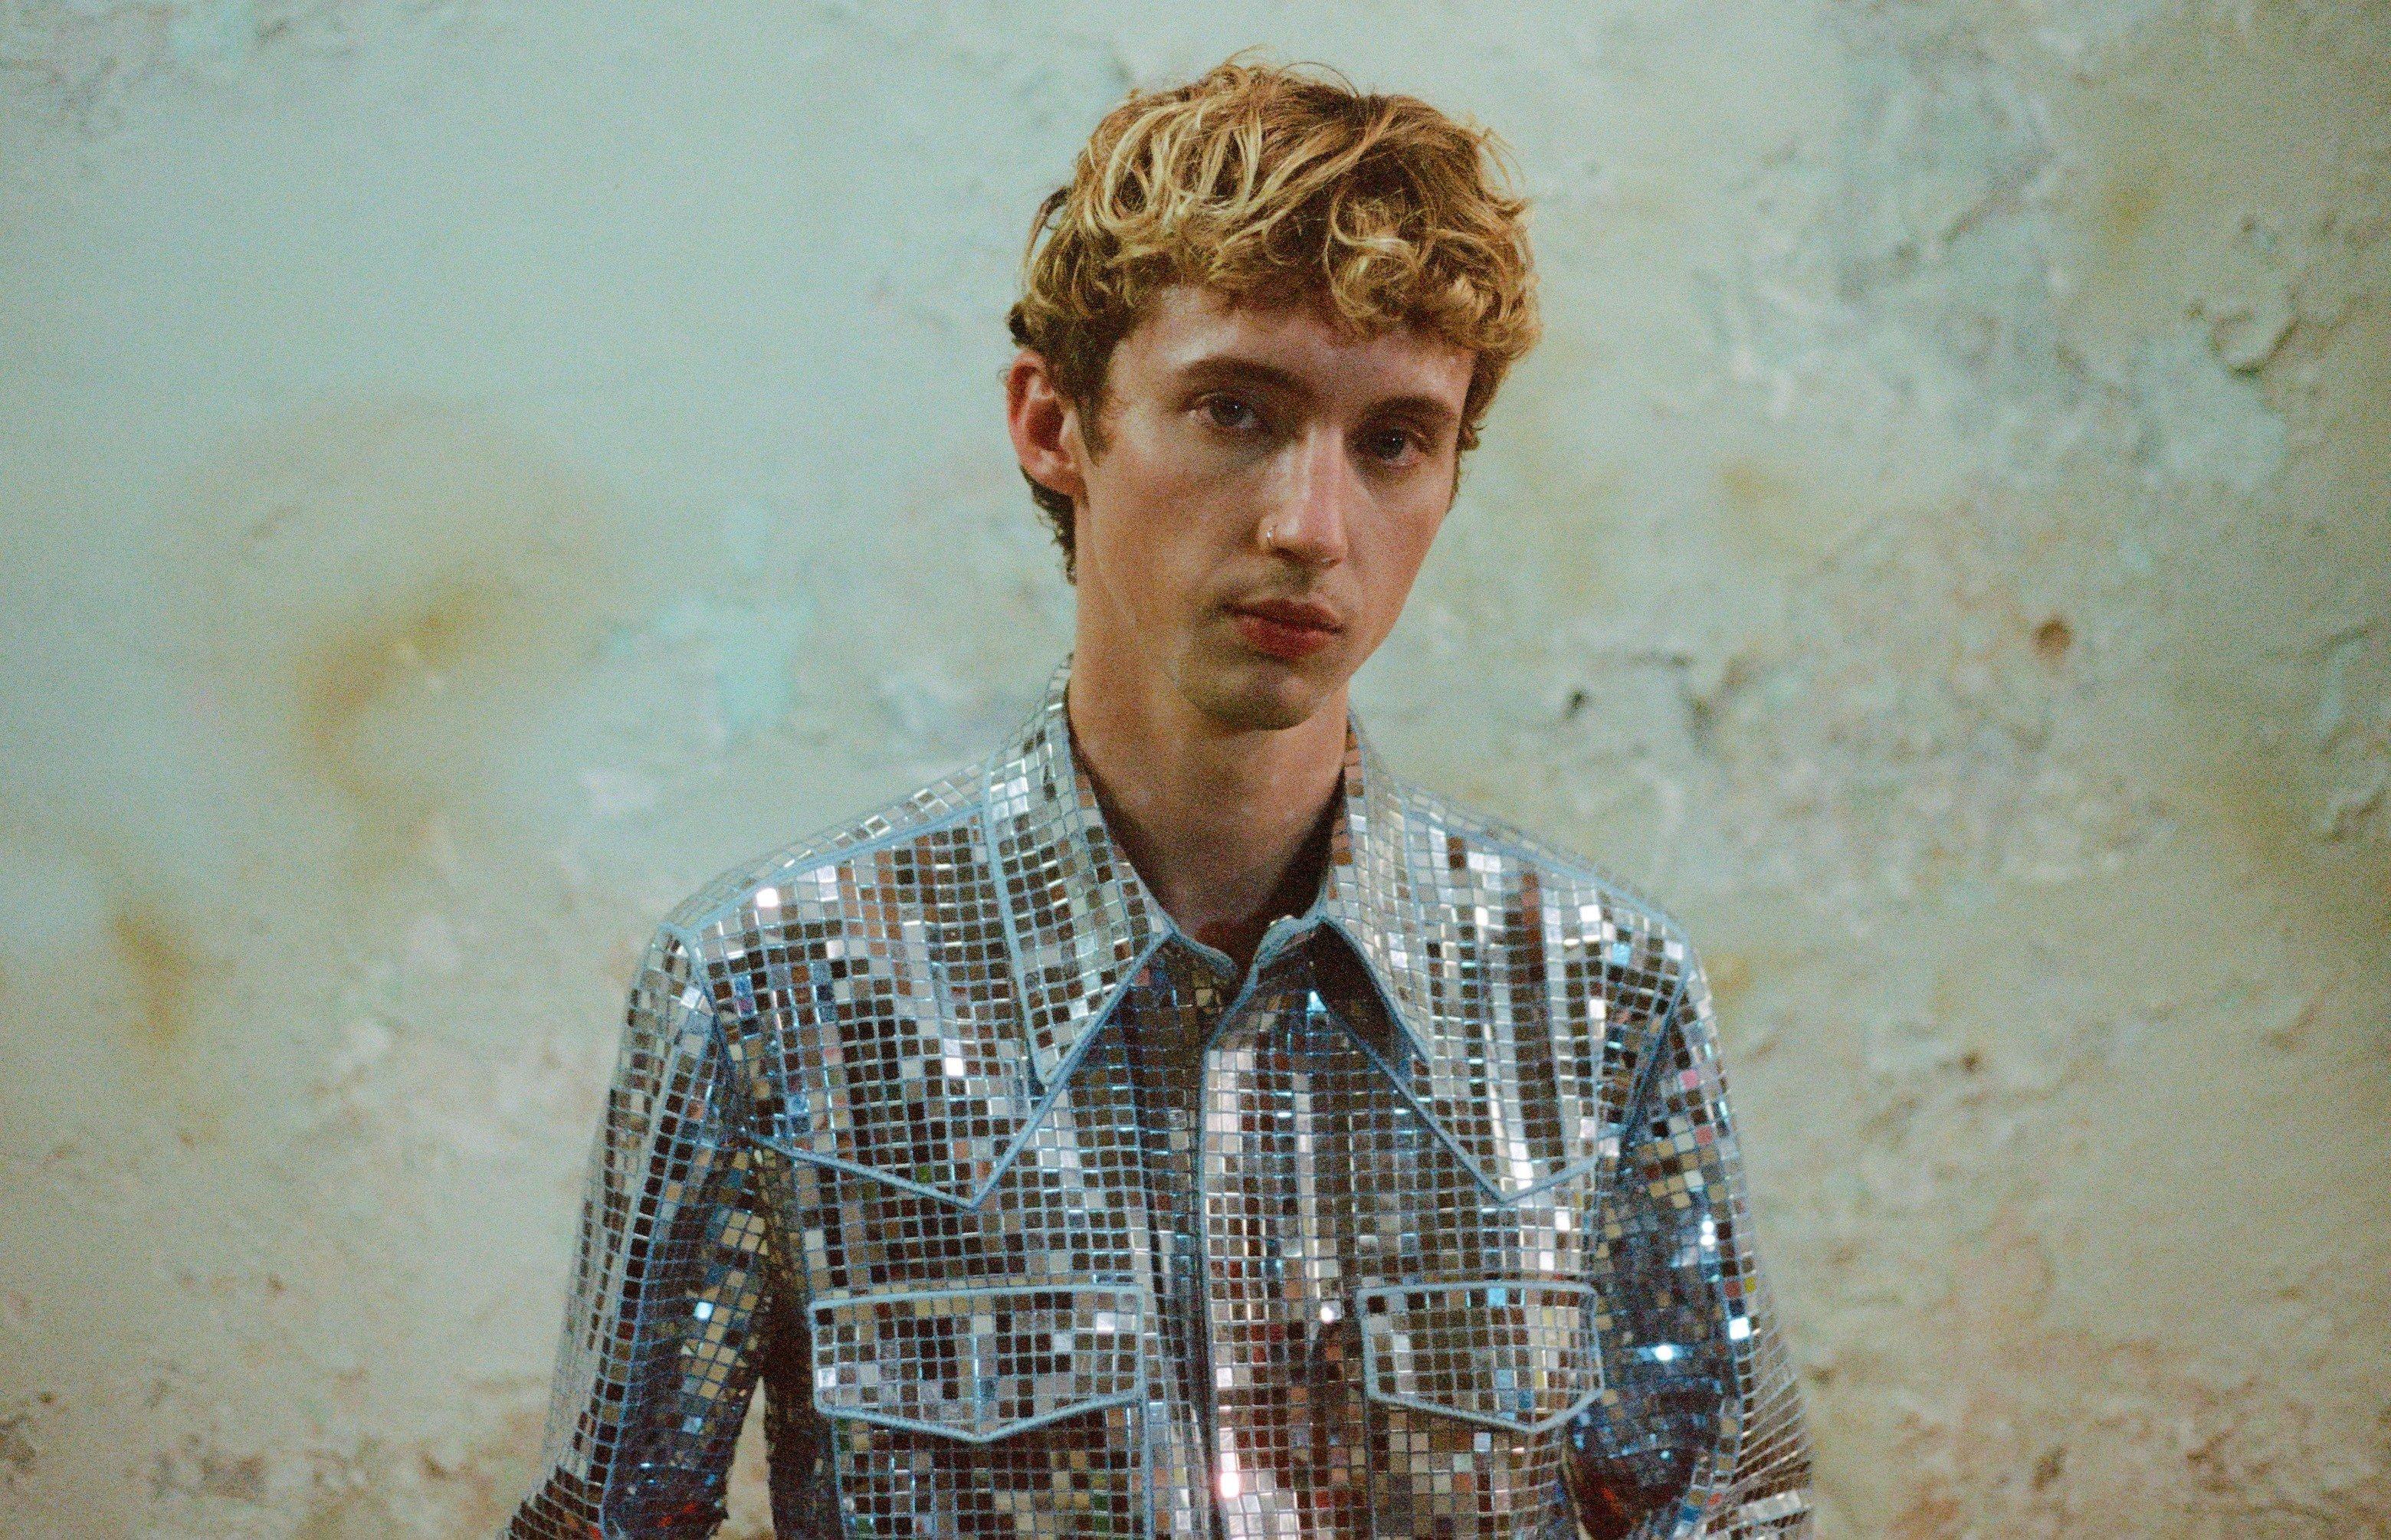 Troye Sivan’s Road To 'Something To Give Each Other' How Transparency